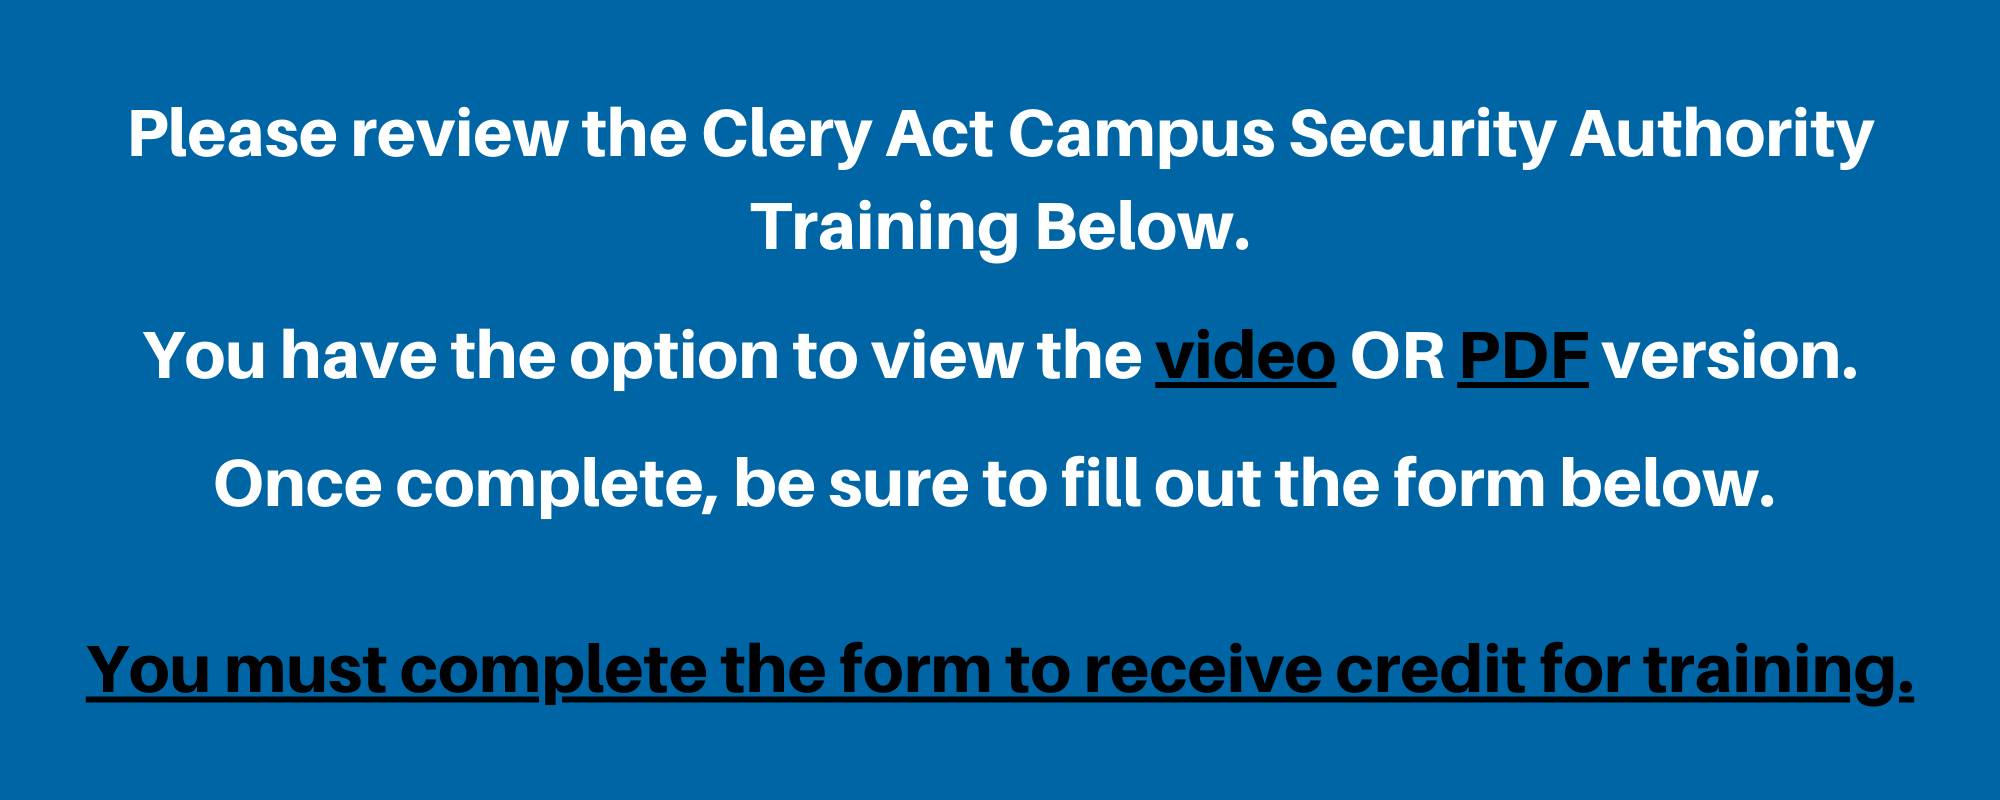 Instructions to review the training below either via PDF or video, then complete the form to receive credit for the training.